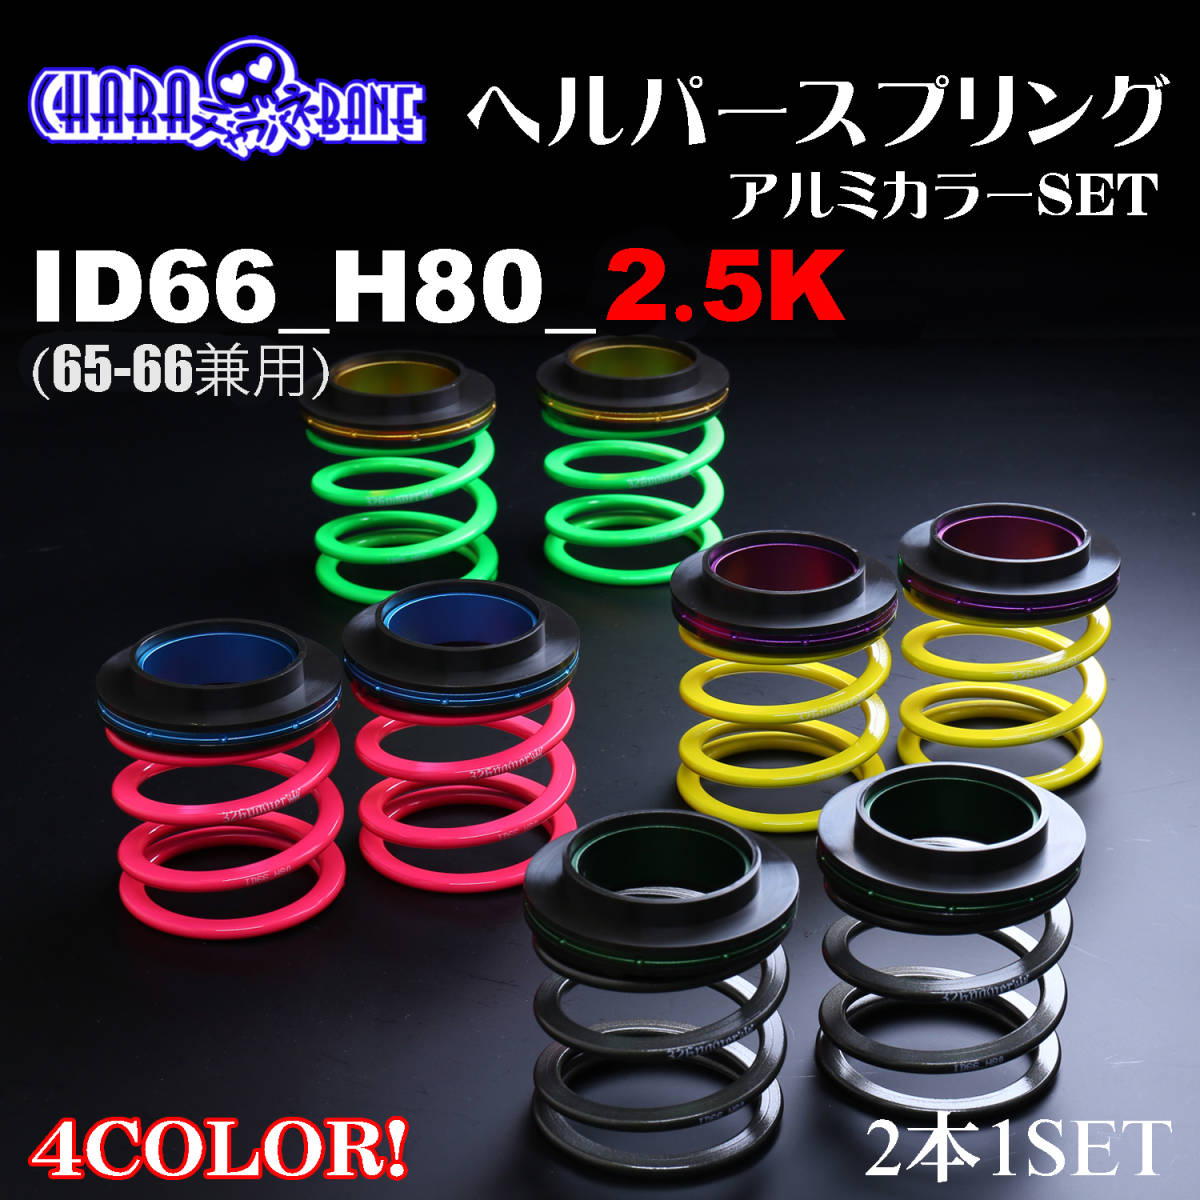 326POWER tea la spring ( direct to coil springs ) helper 3P set ID66(65-66 combined use ) H80 2.5K pink * immediate payment vivid color new goods 2 pcs set 03